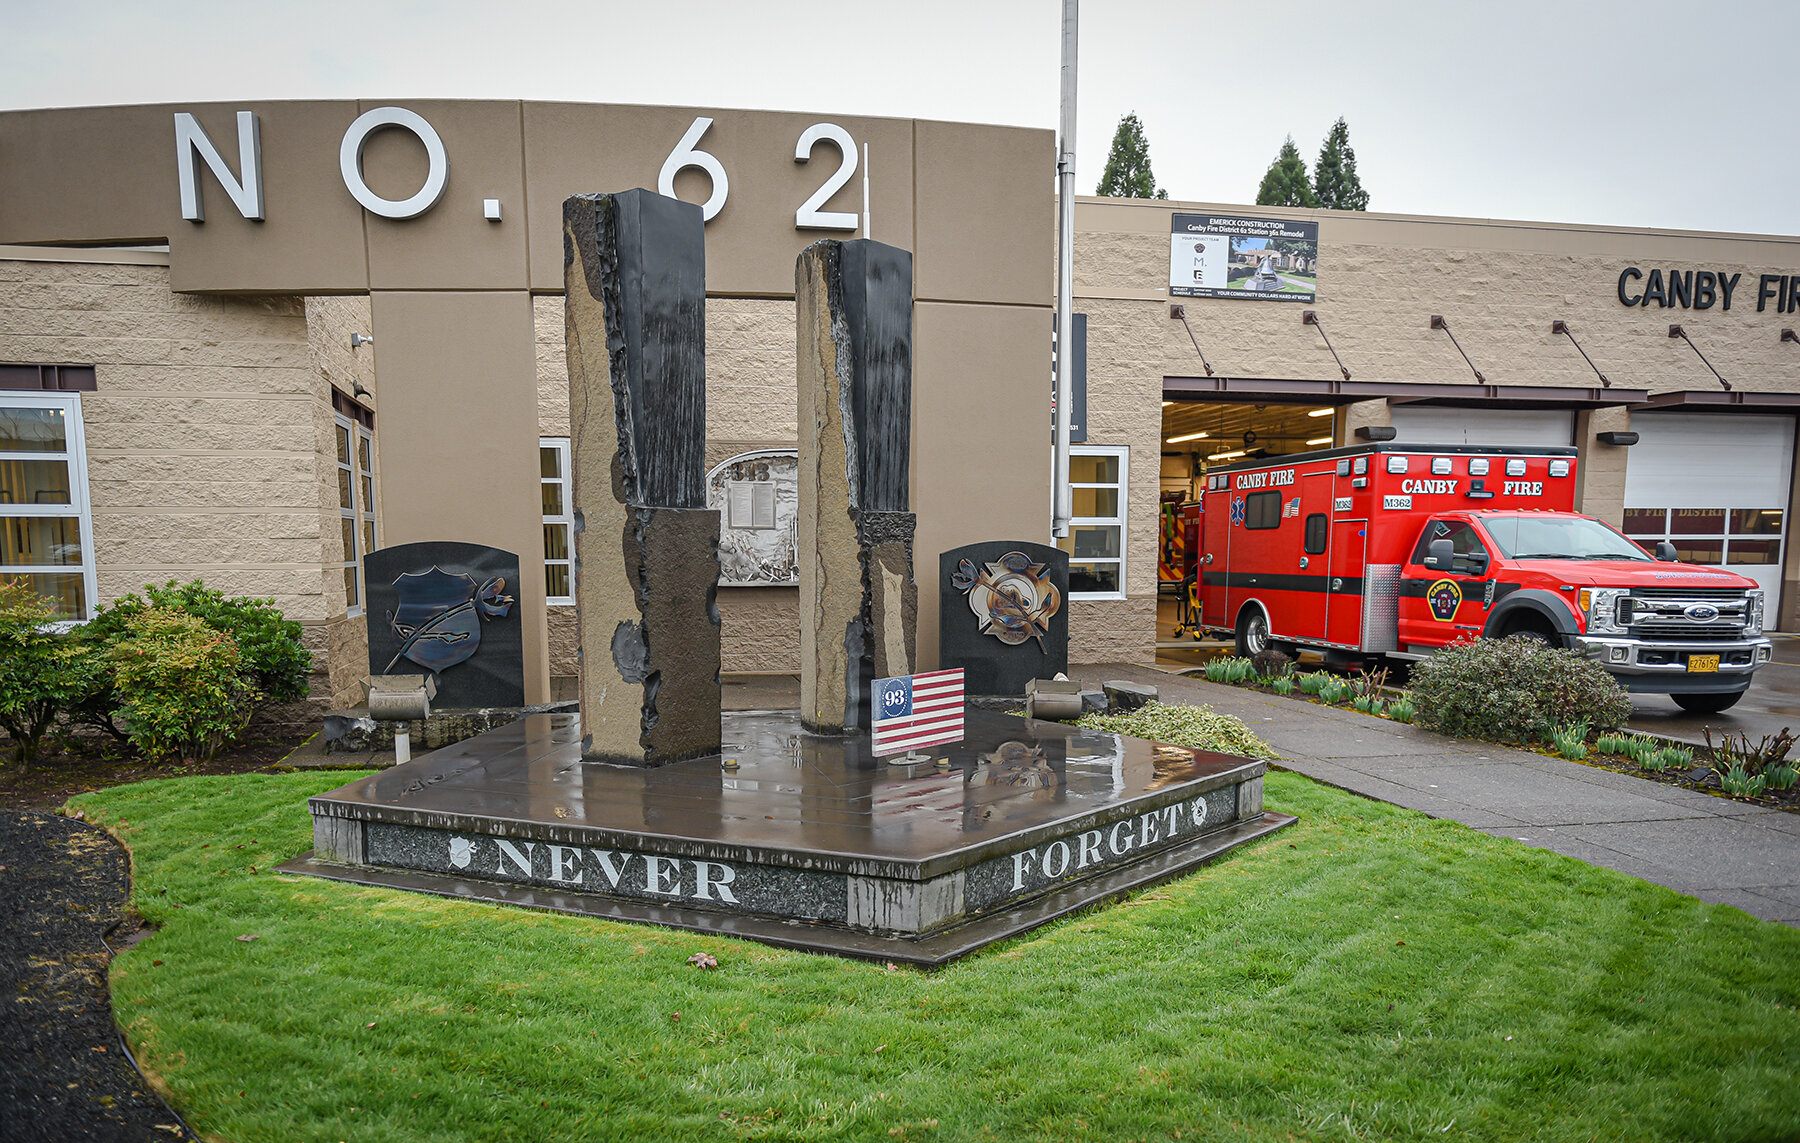 Canby Fire Station - edited-51.jpg